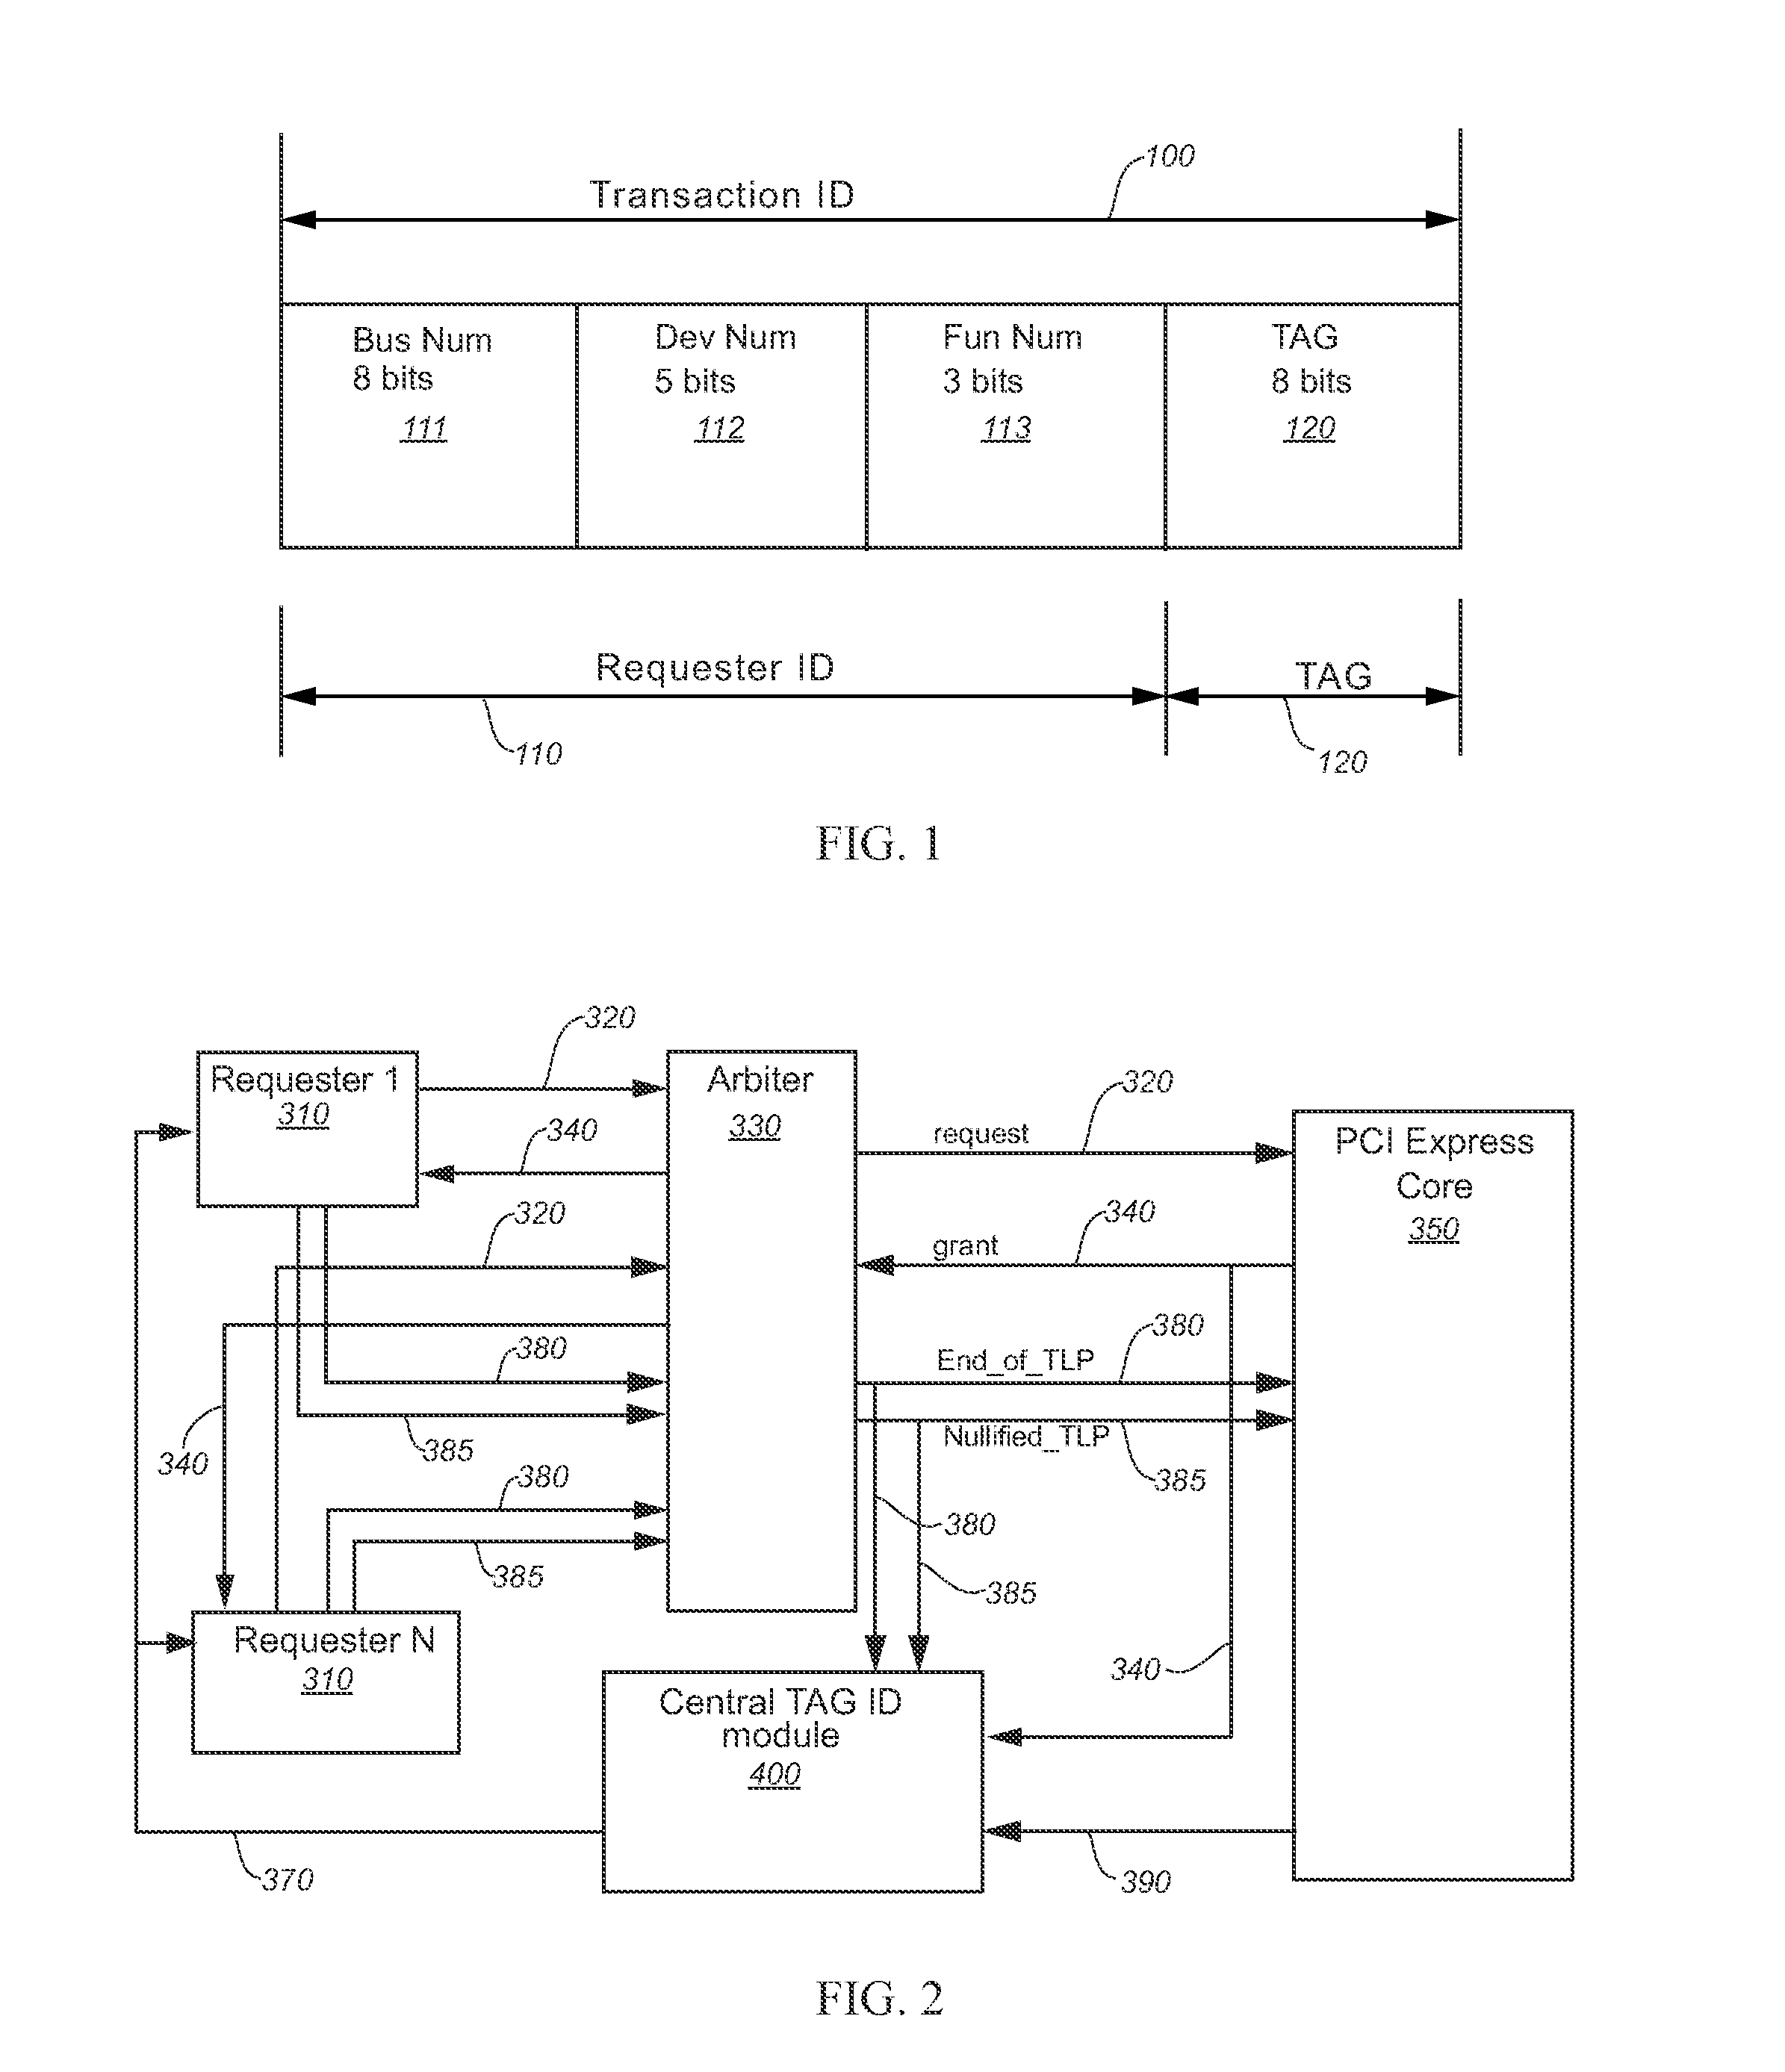 Method and Apparatus for Generating Unique Identification Numbers for PCI Express Transactions with Substantially Increased Performance